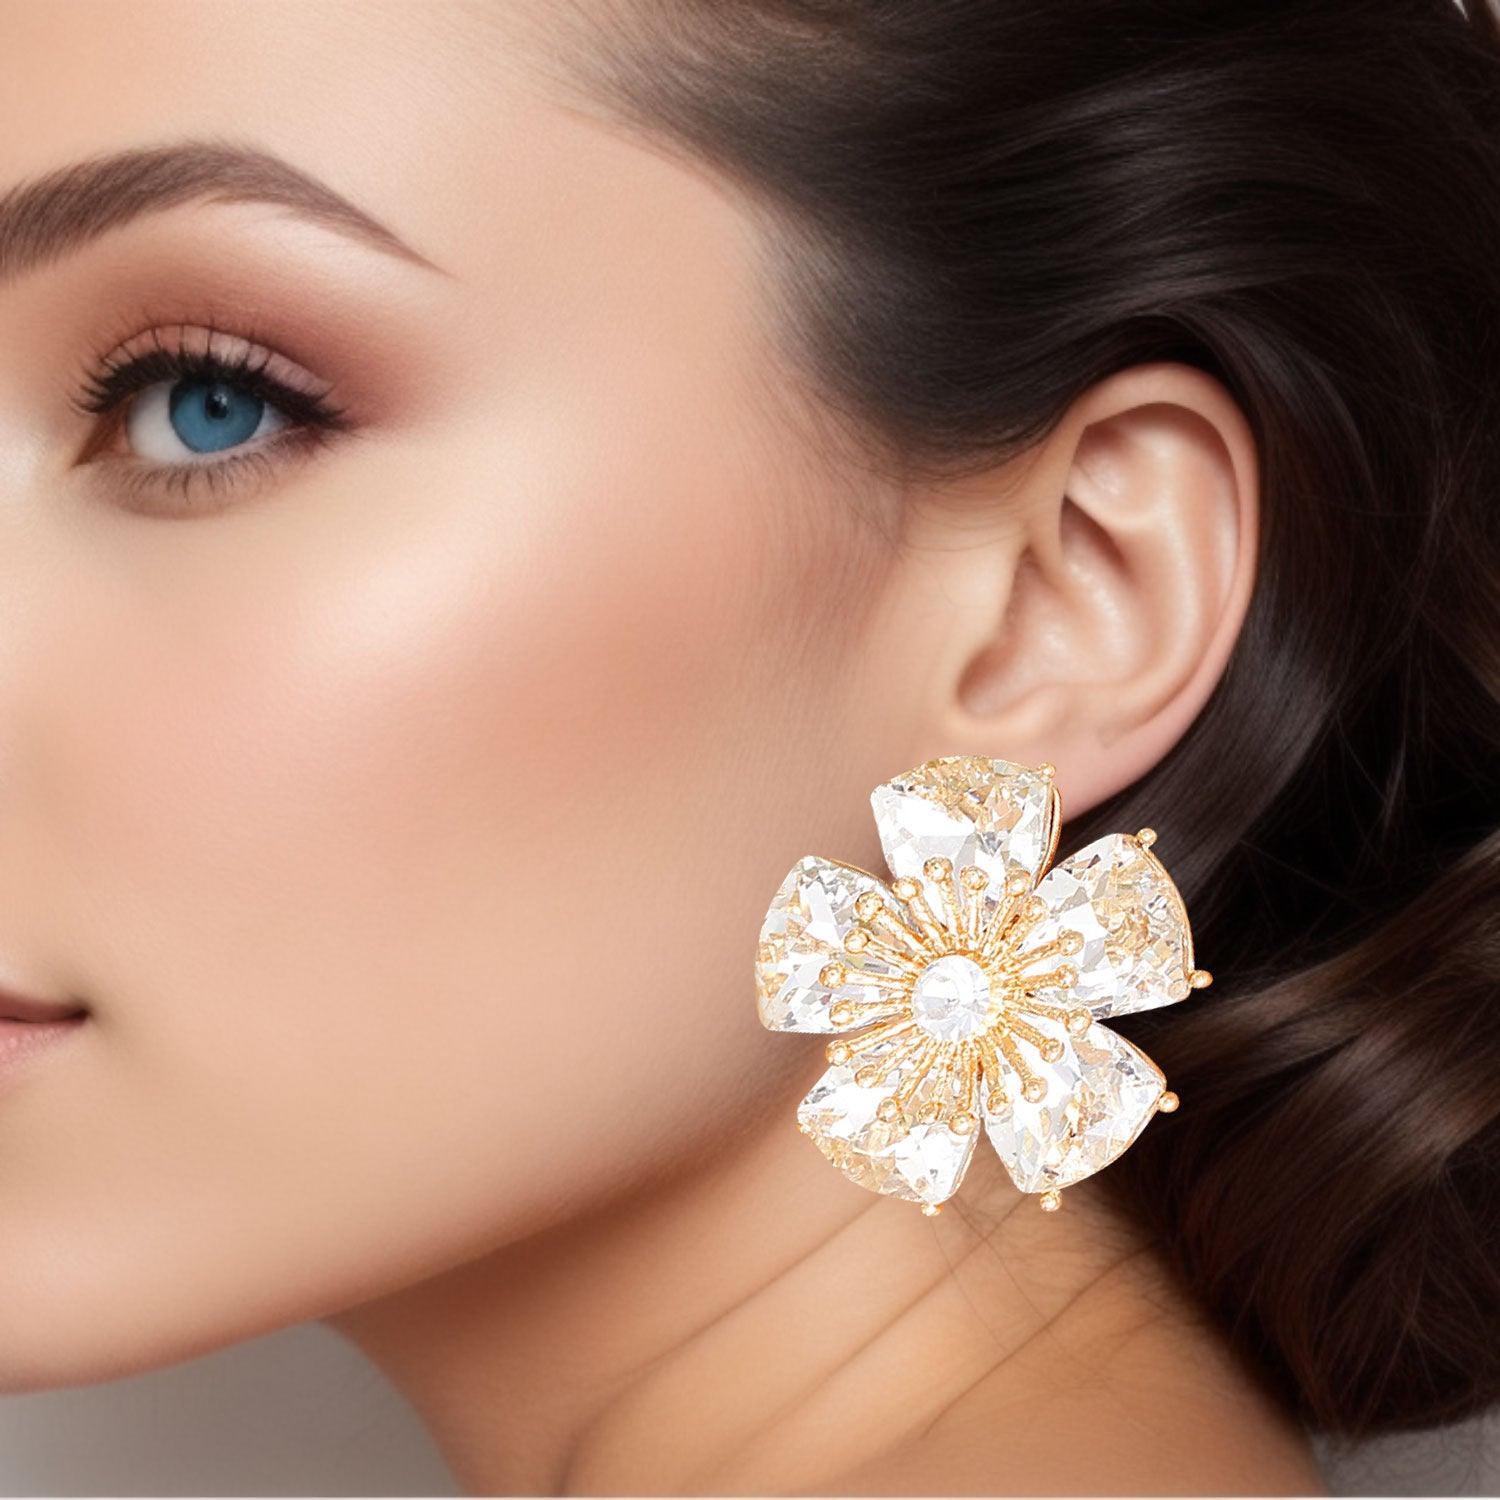 Bloom with Style: Get Your Flower Clip-On Earrings Today!